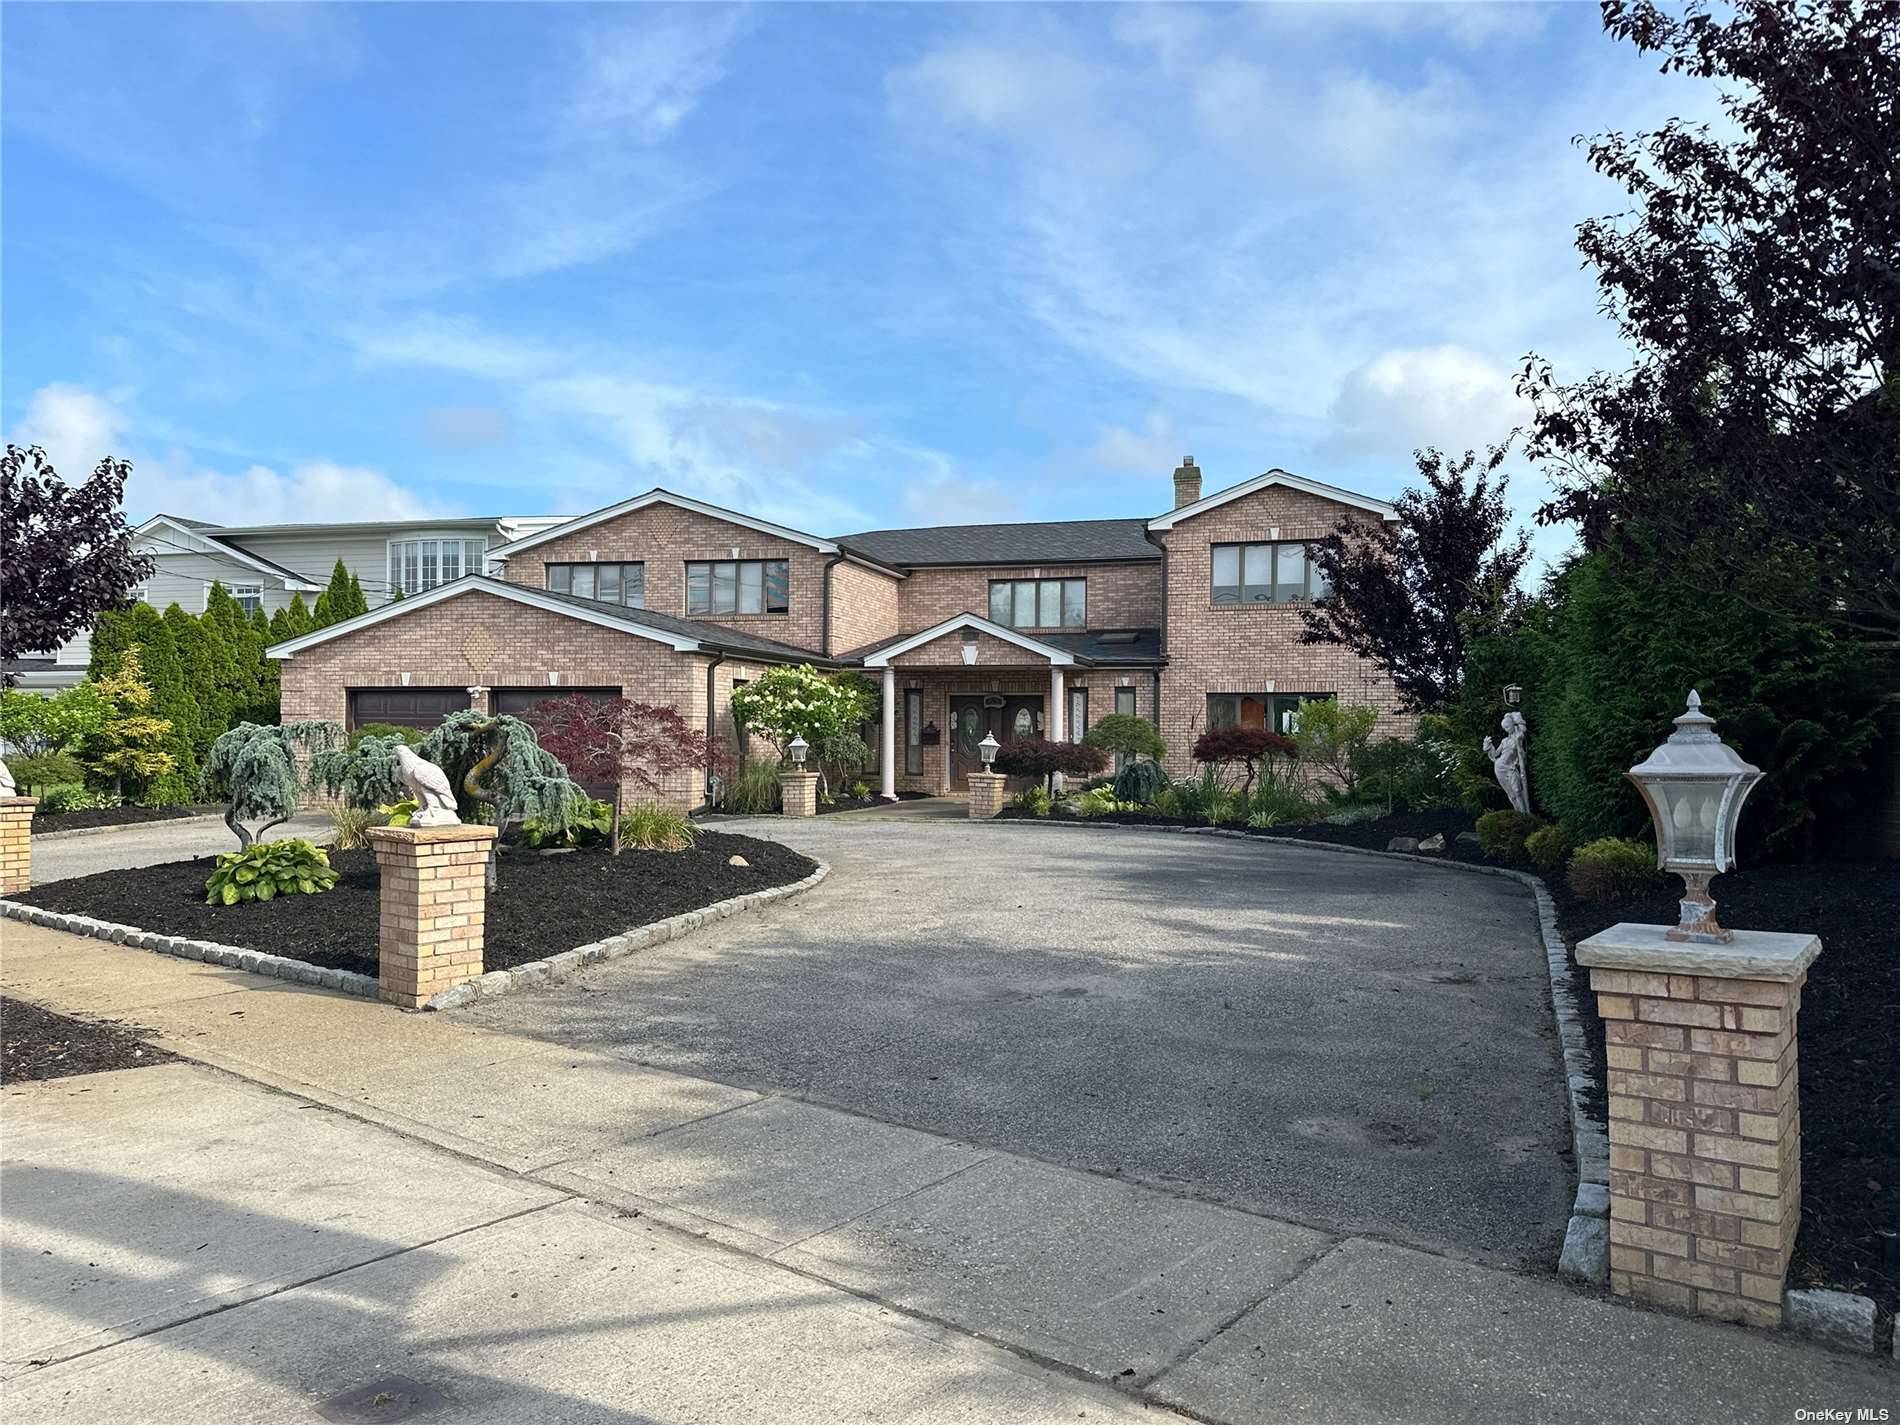 Welcome to this magnificent 6, 000 sq ft home situated right on the water.